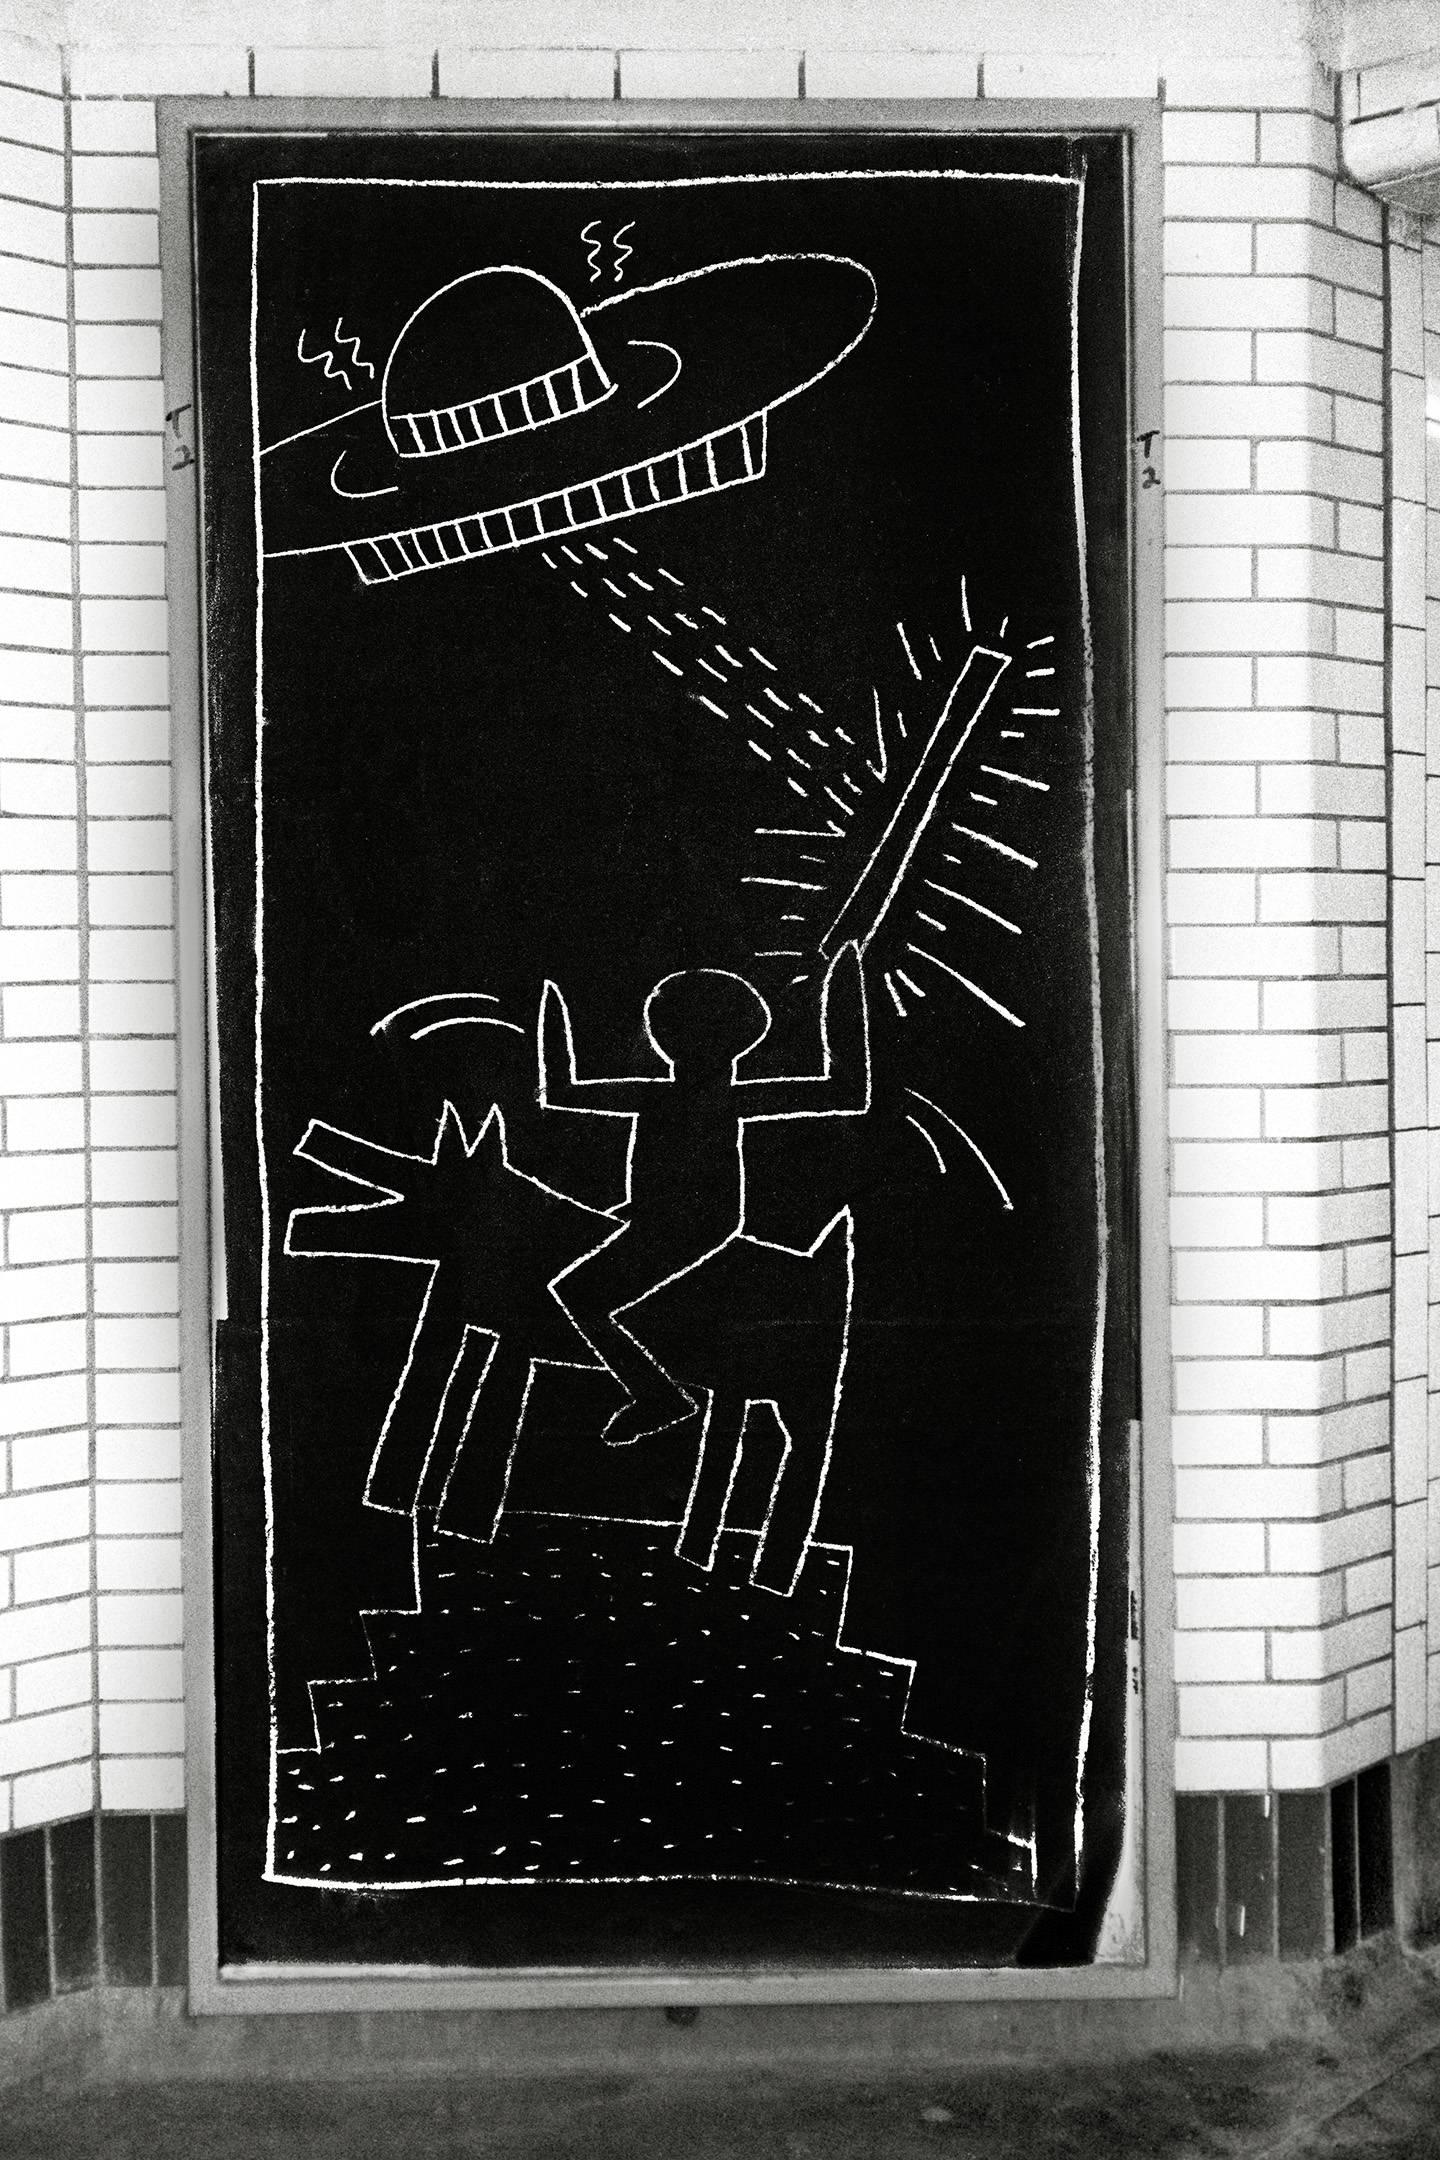 Fernando Natalici Black and White Photograph - Keith Haring Subway Art photo c.1981 (Keith Haring subway drawings) 